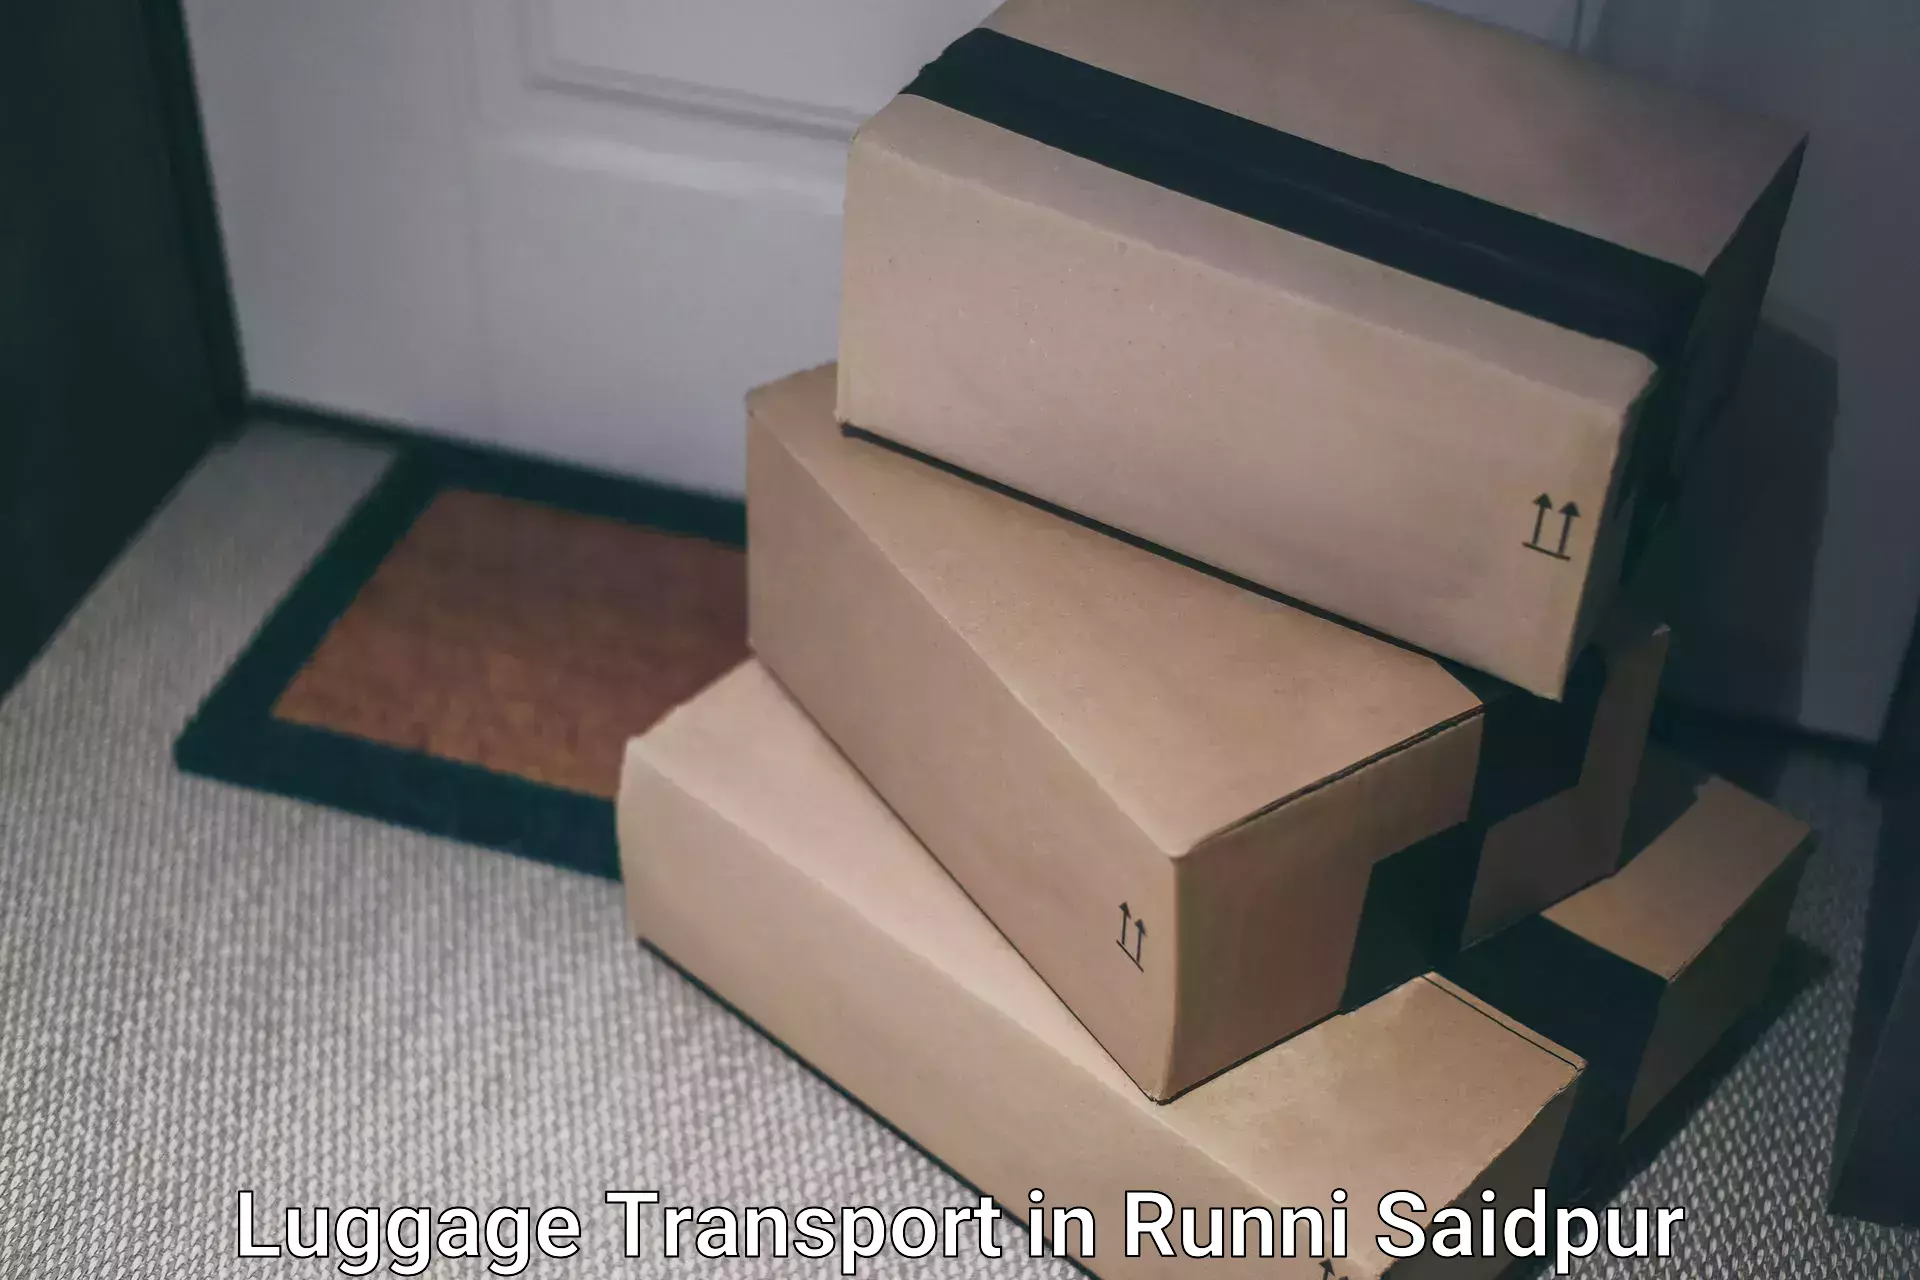 Customized luggage delivery in Runni Saidpur